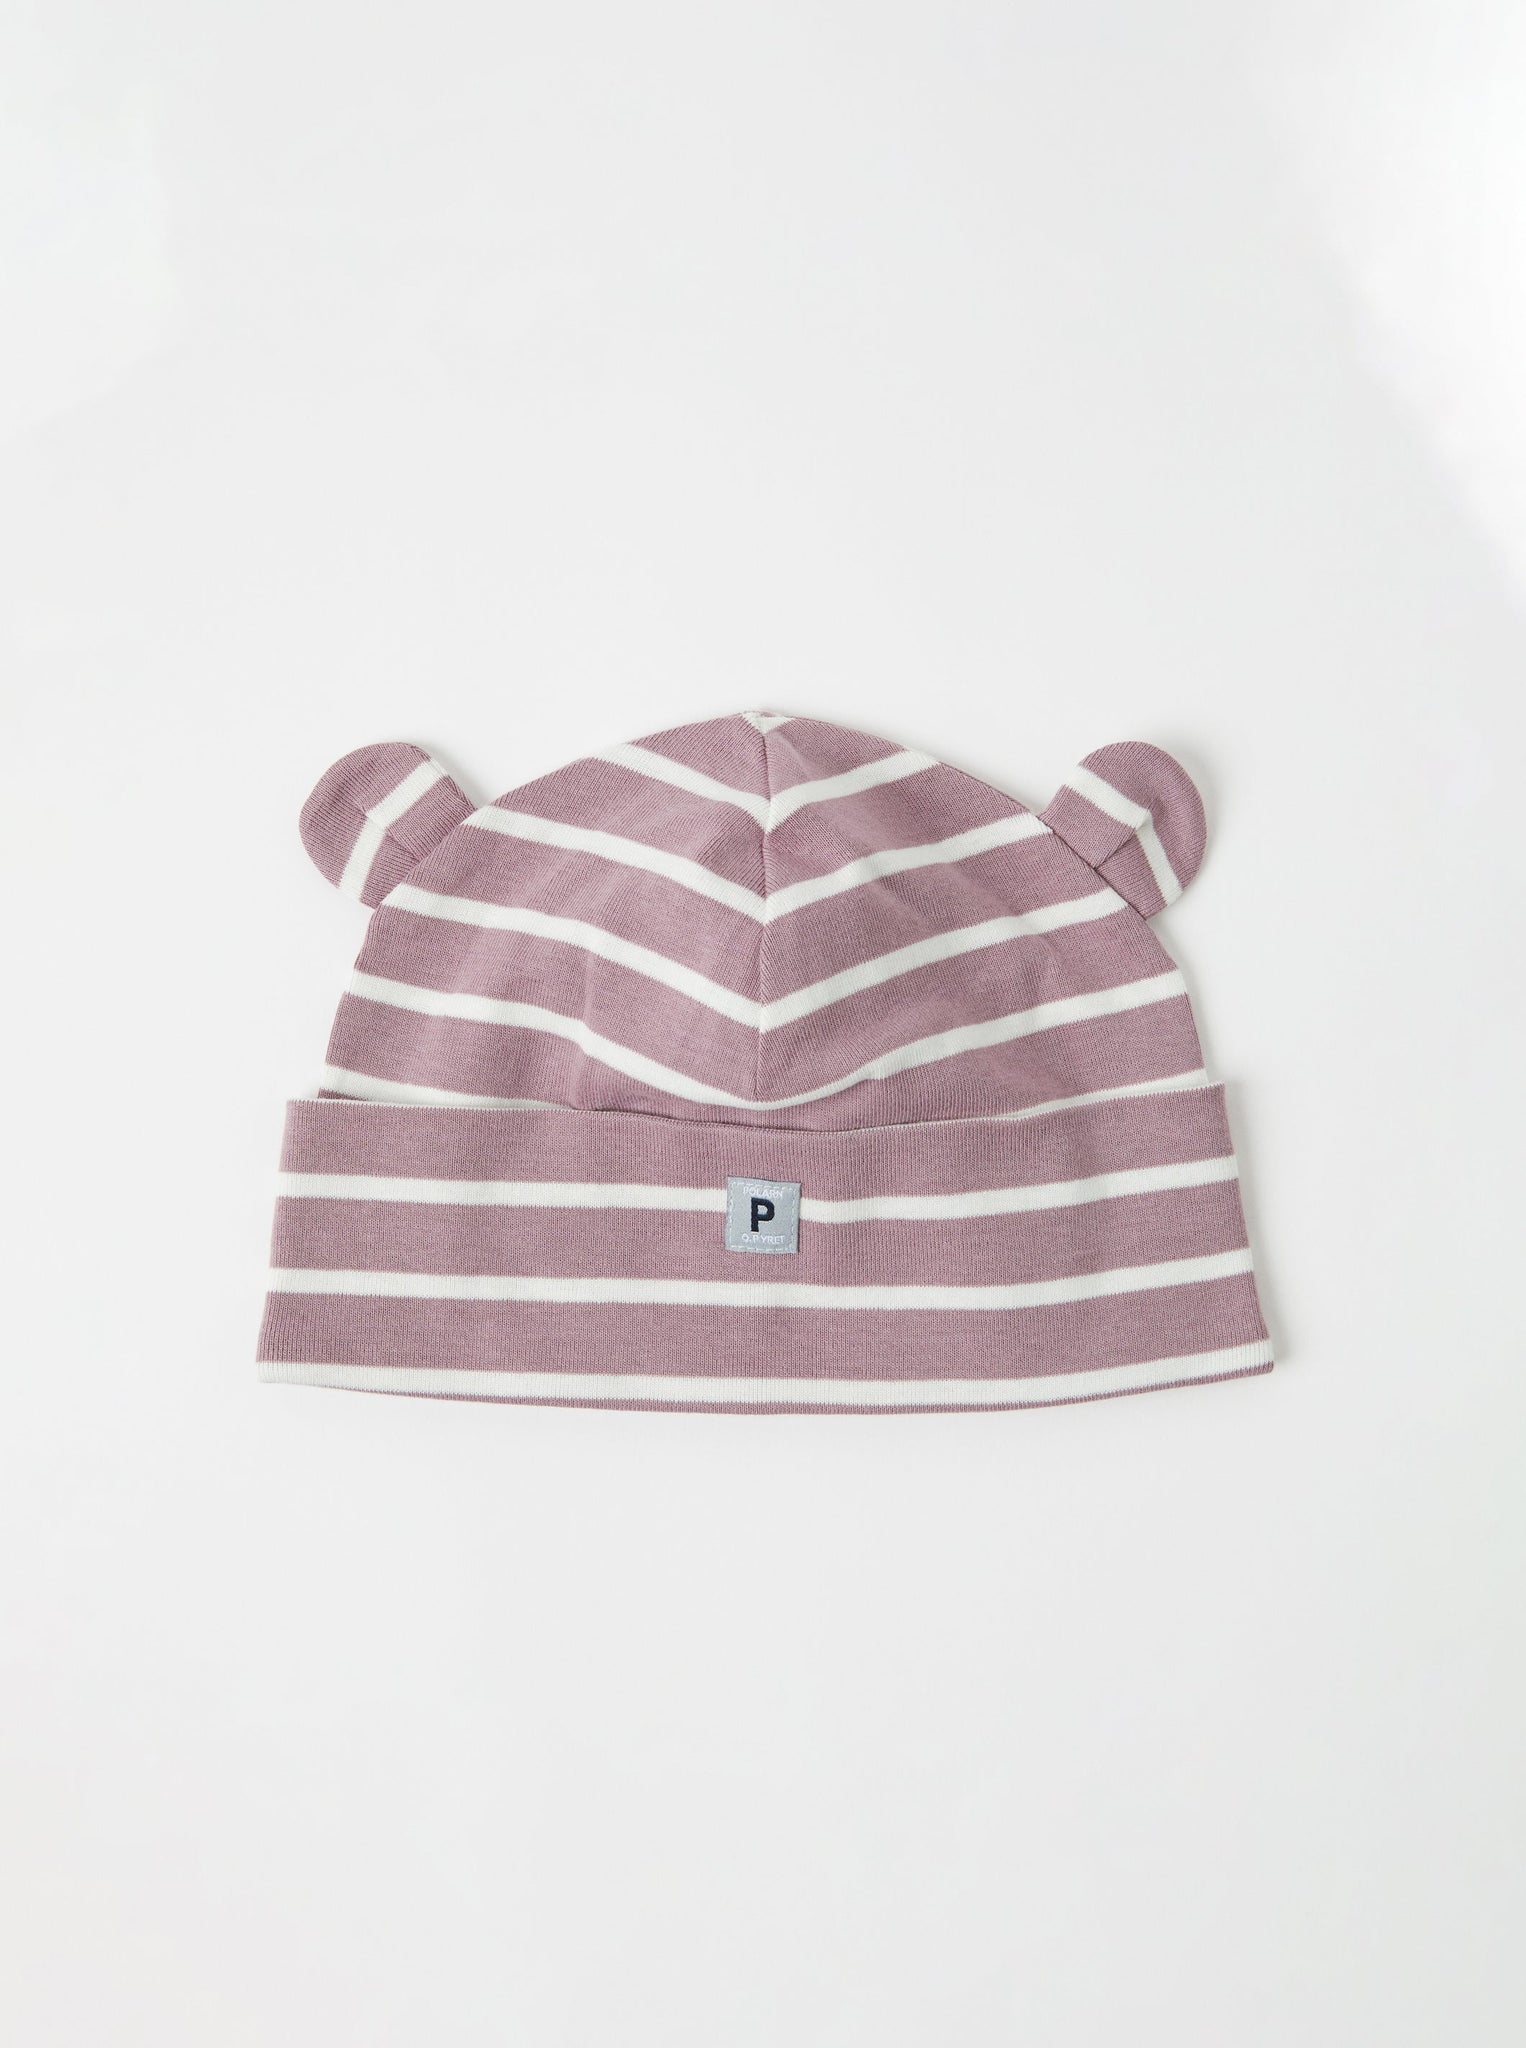 Organic Cotton Purple Baby Beanie Hat from the Polarn O. Pyret babywear collection. Nordic baby clothes made from sustainable sources.